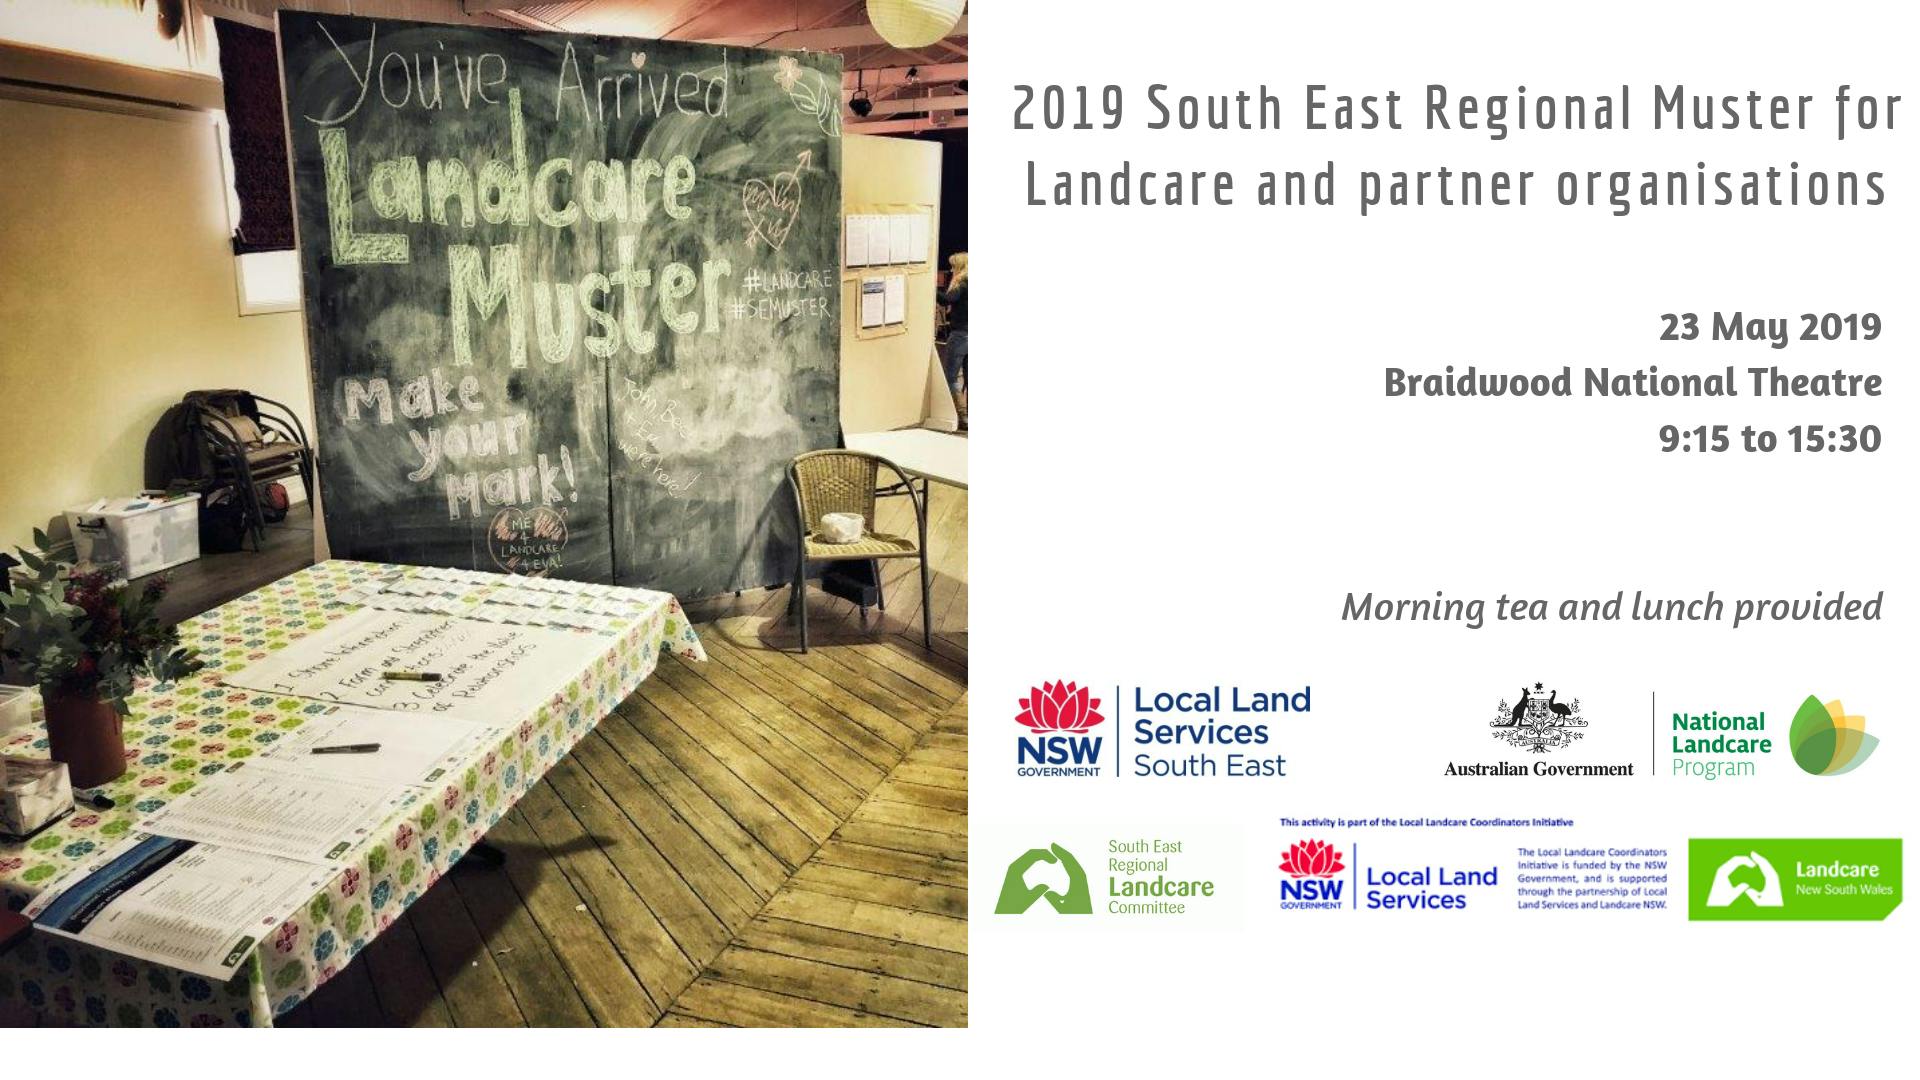 2019 Muster for Landcare in the South East